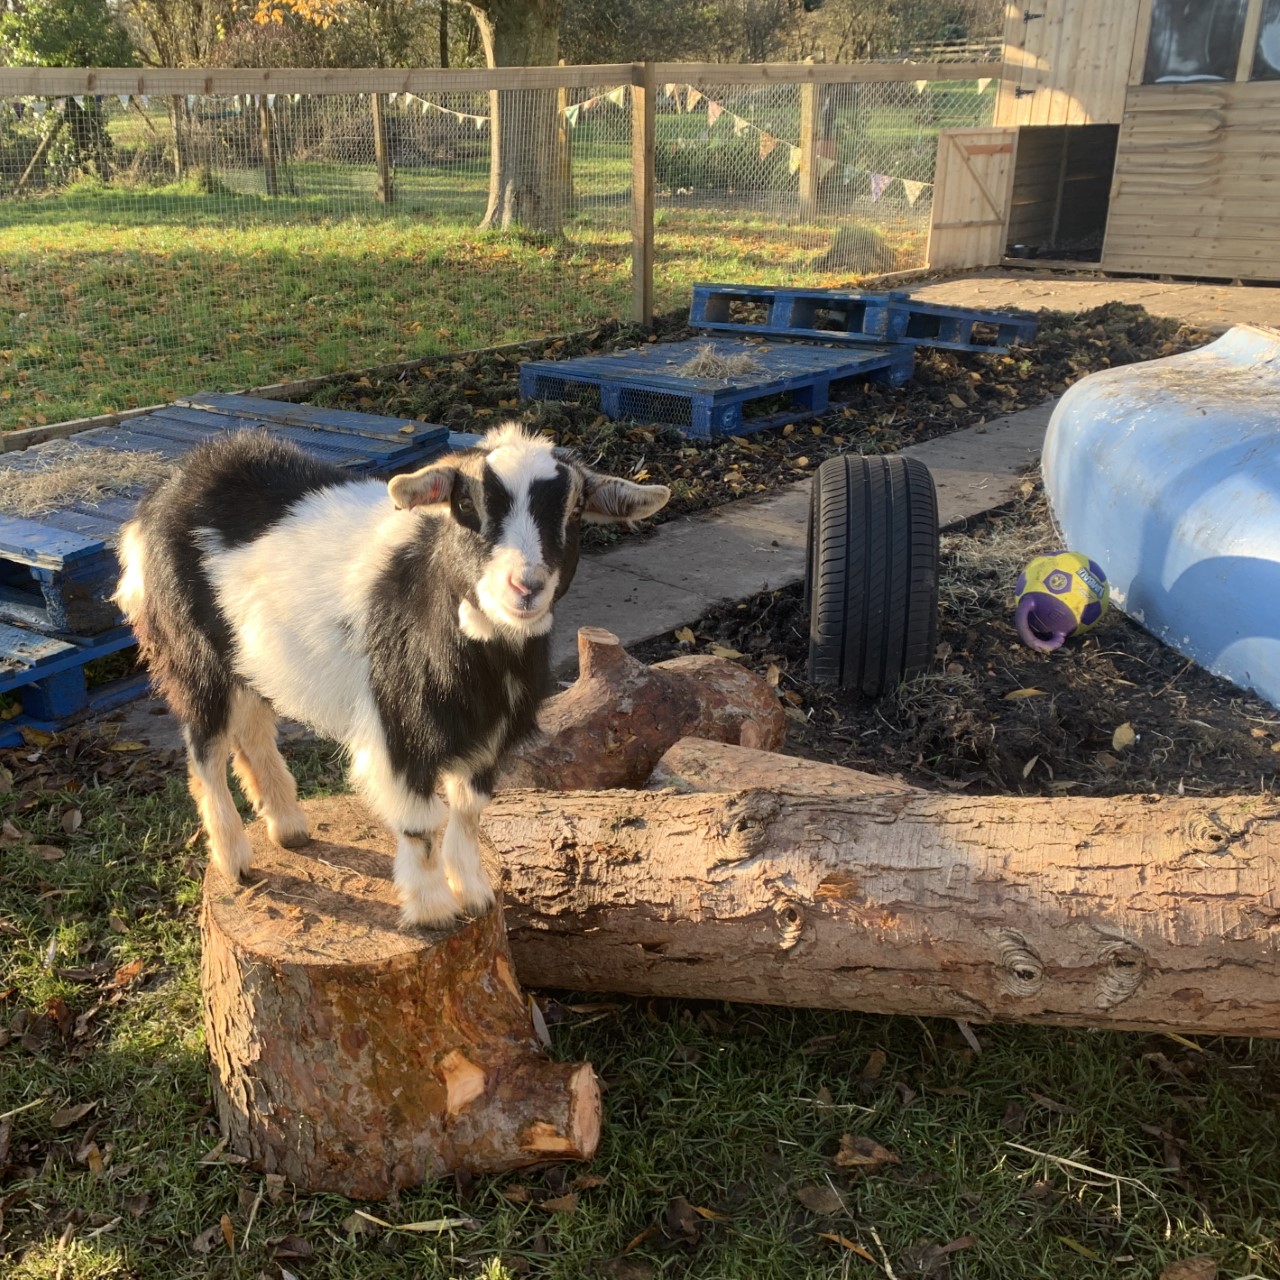 One of the goats enjoying the logs.